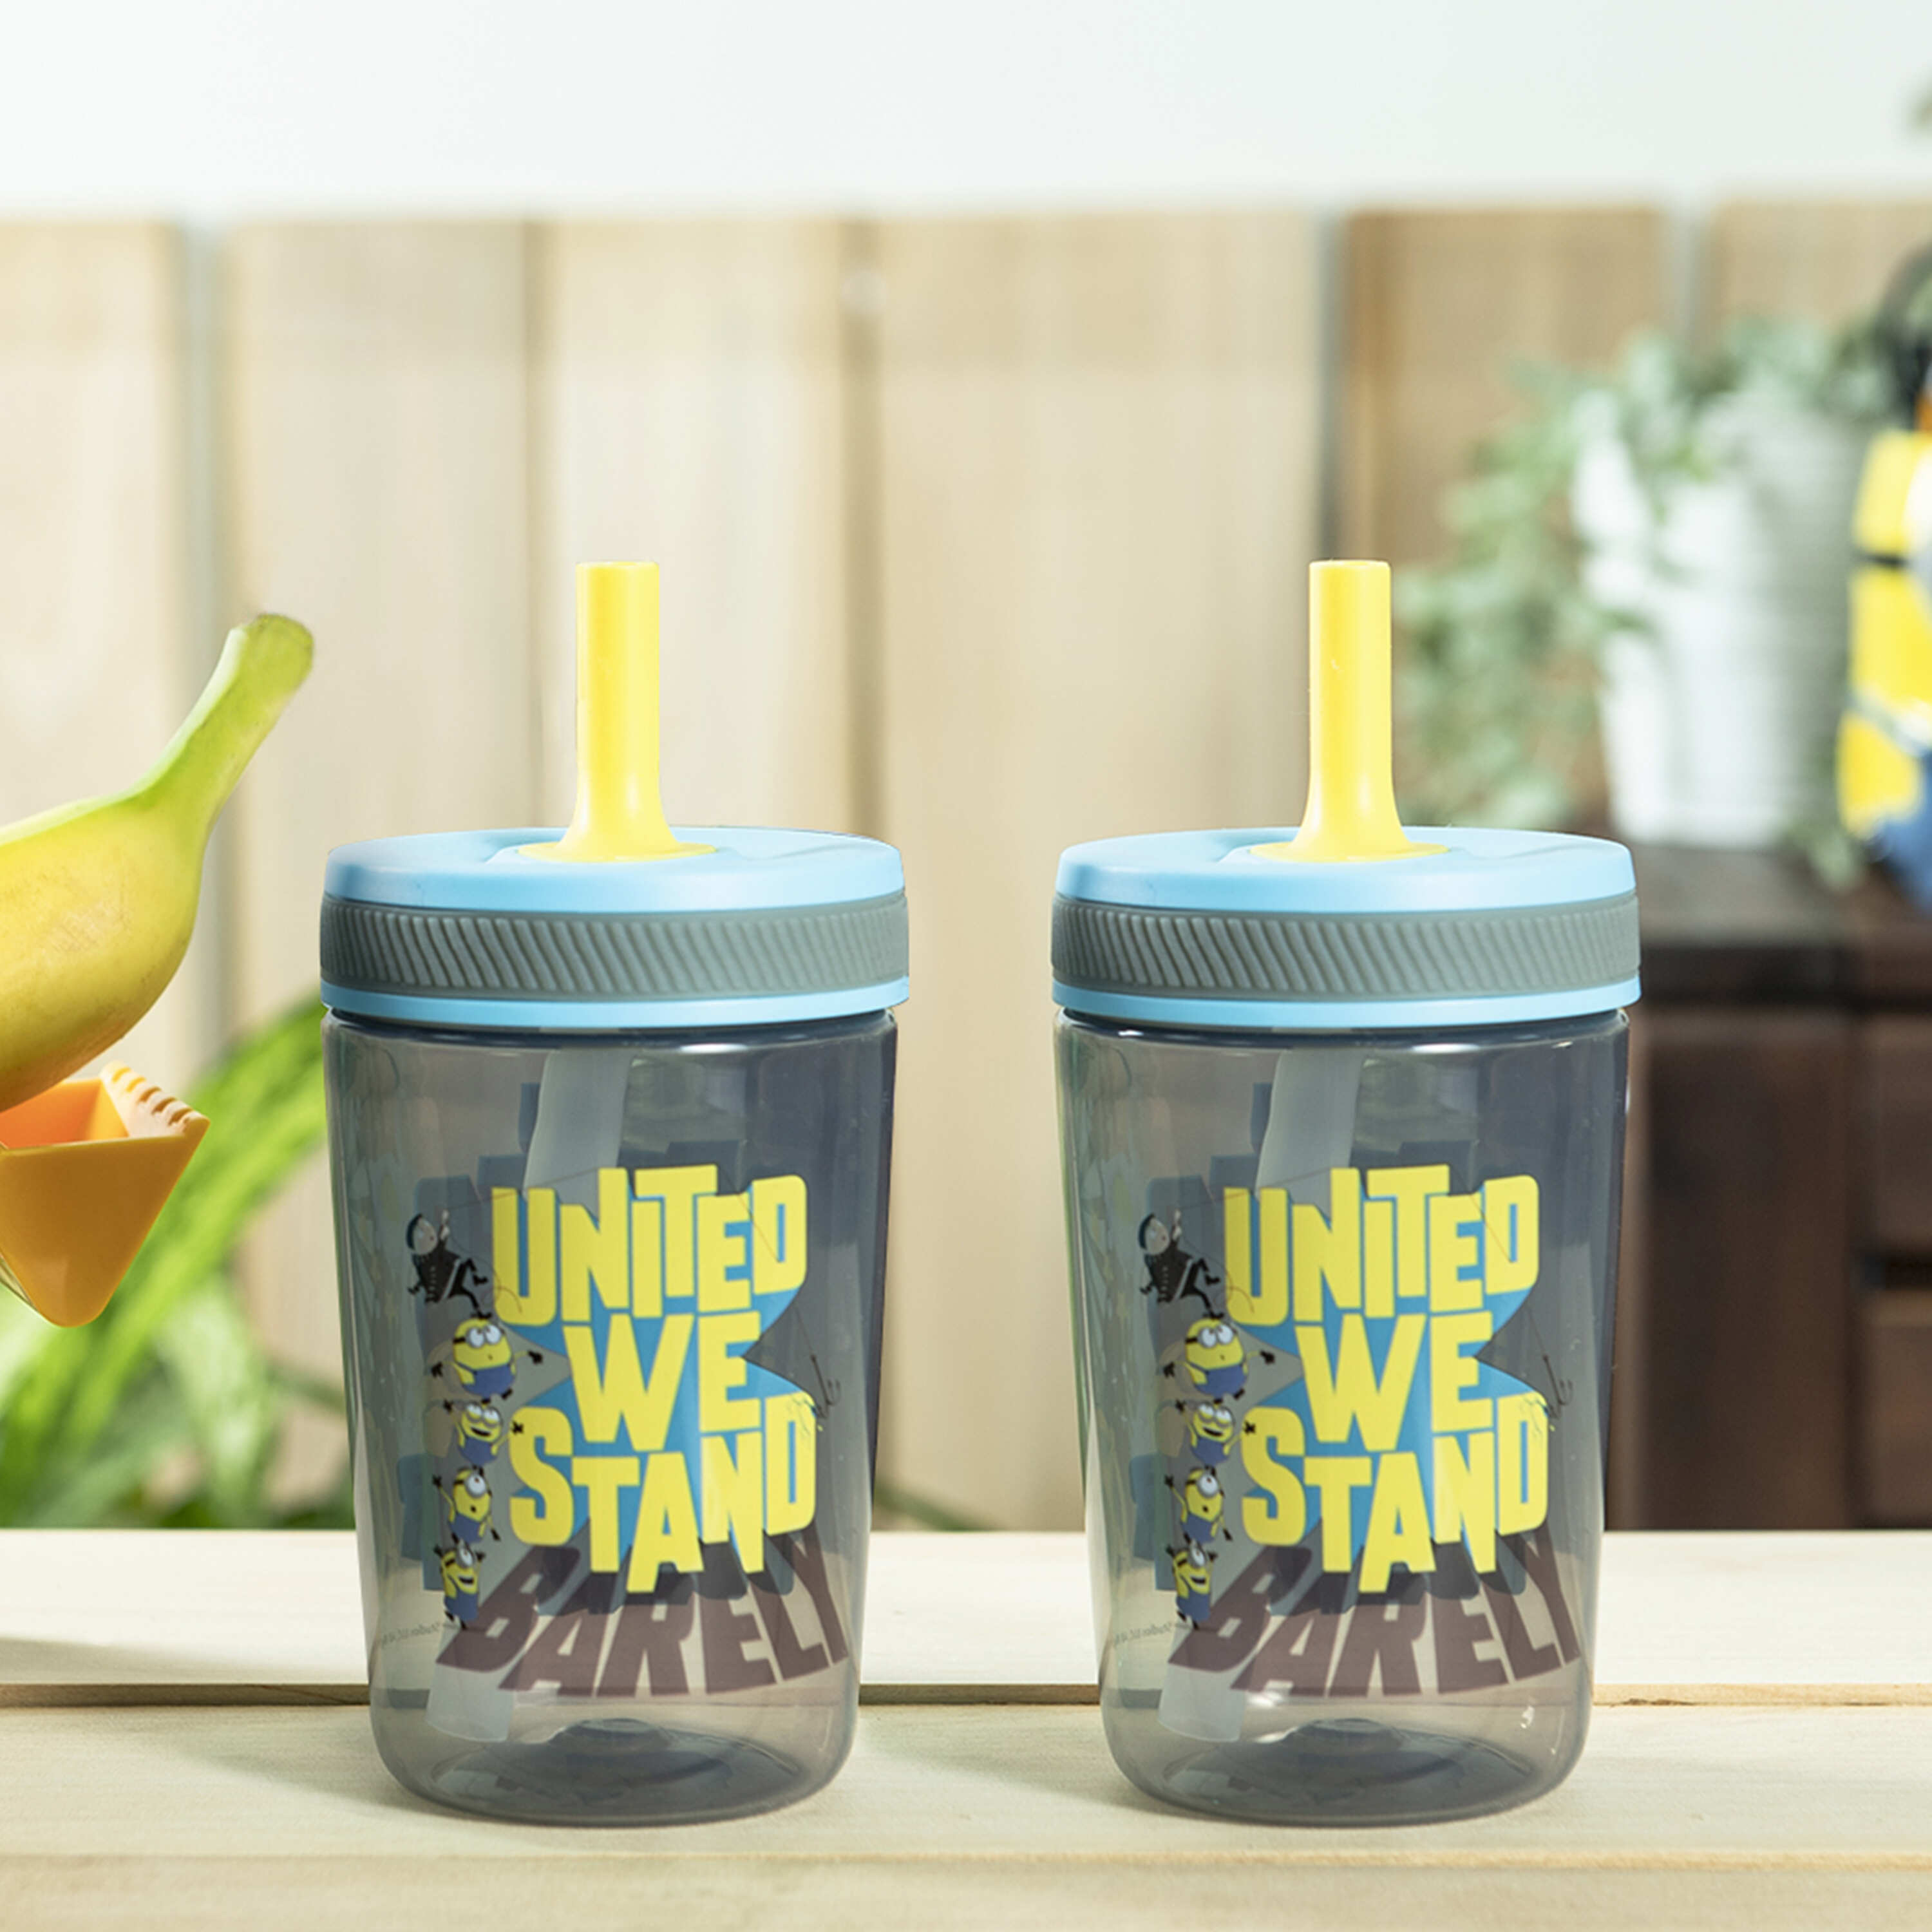 Ages 3+ 5.5" Plastic Cup by Zak Designs 2016 Minions by Universal Studios 